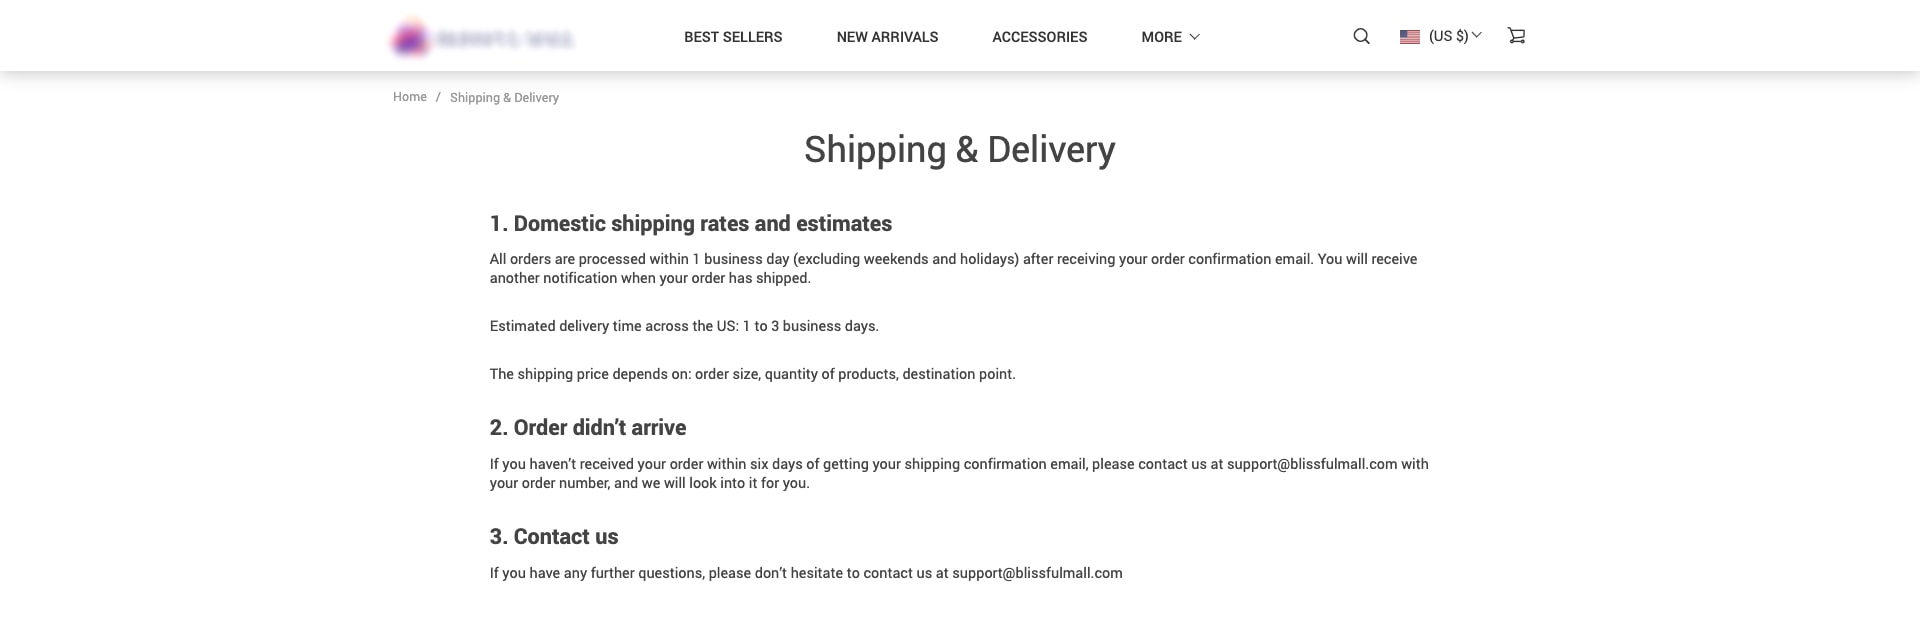 a picture showing that fast shipping matters in ecommerce